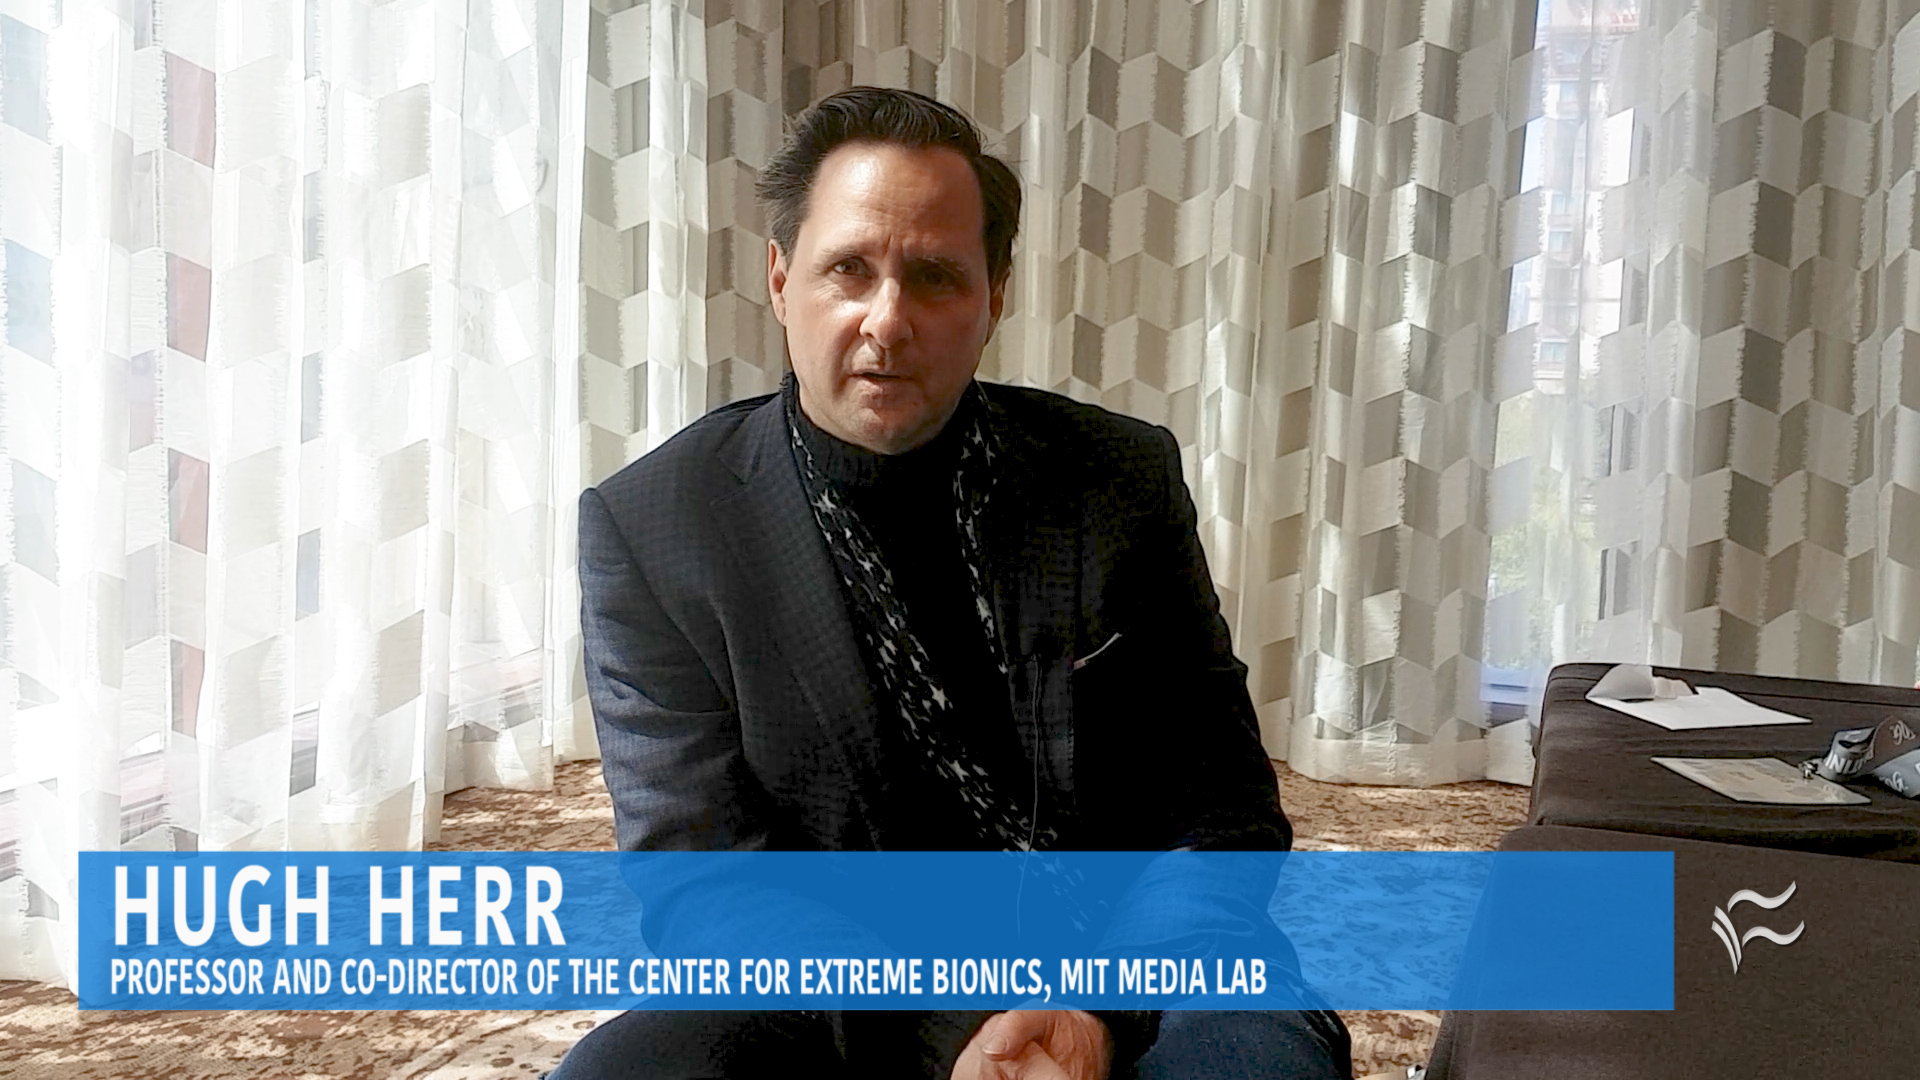 Hugh Herr, Professor and Co-director of the Center for Extreme Bionics, MIT Media Lab